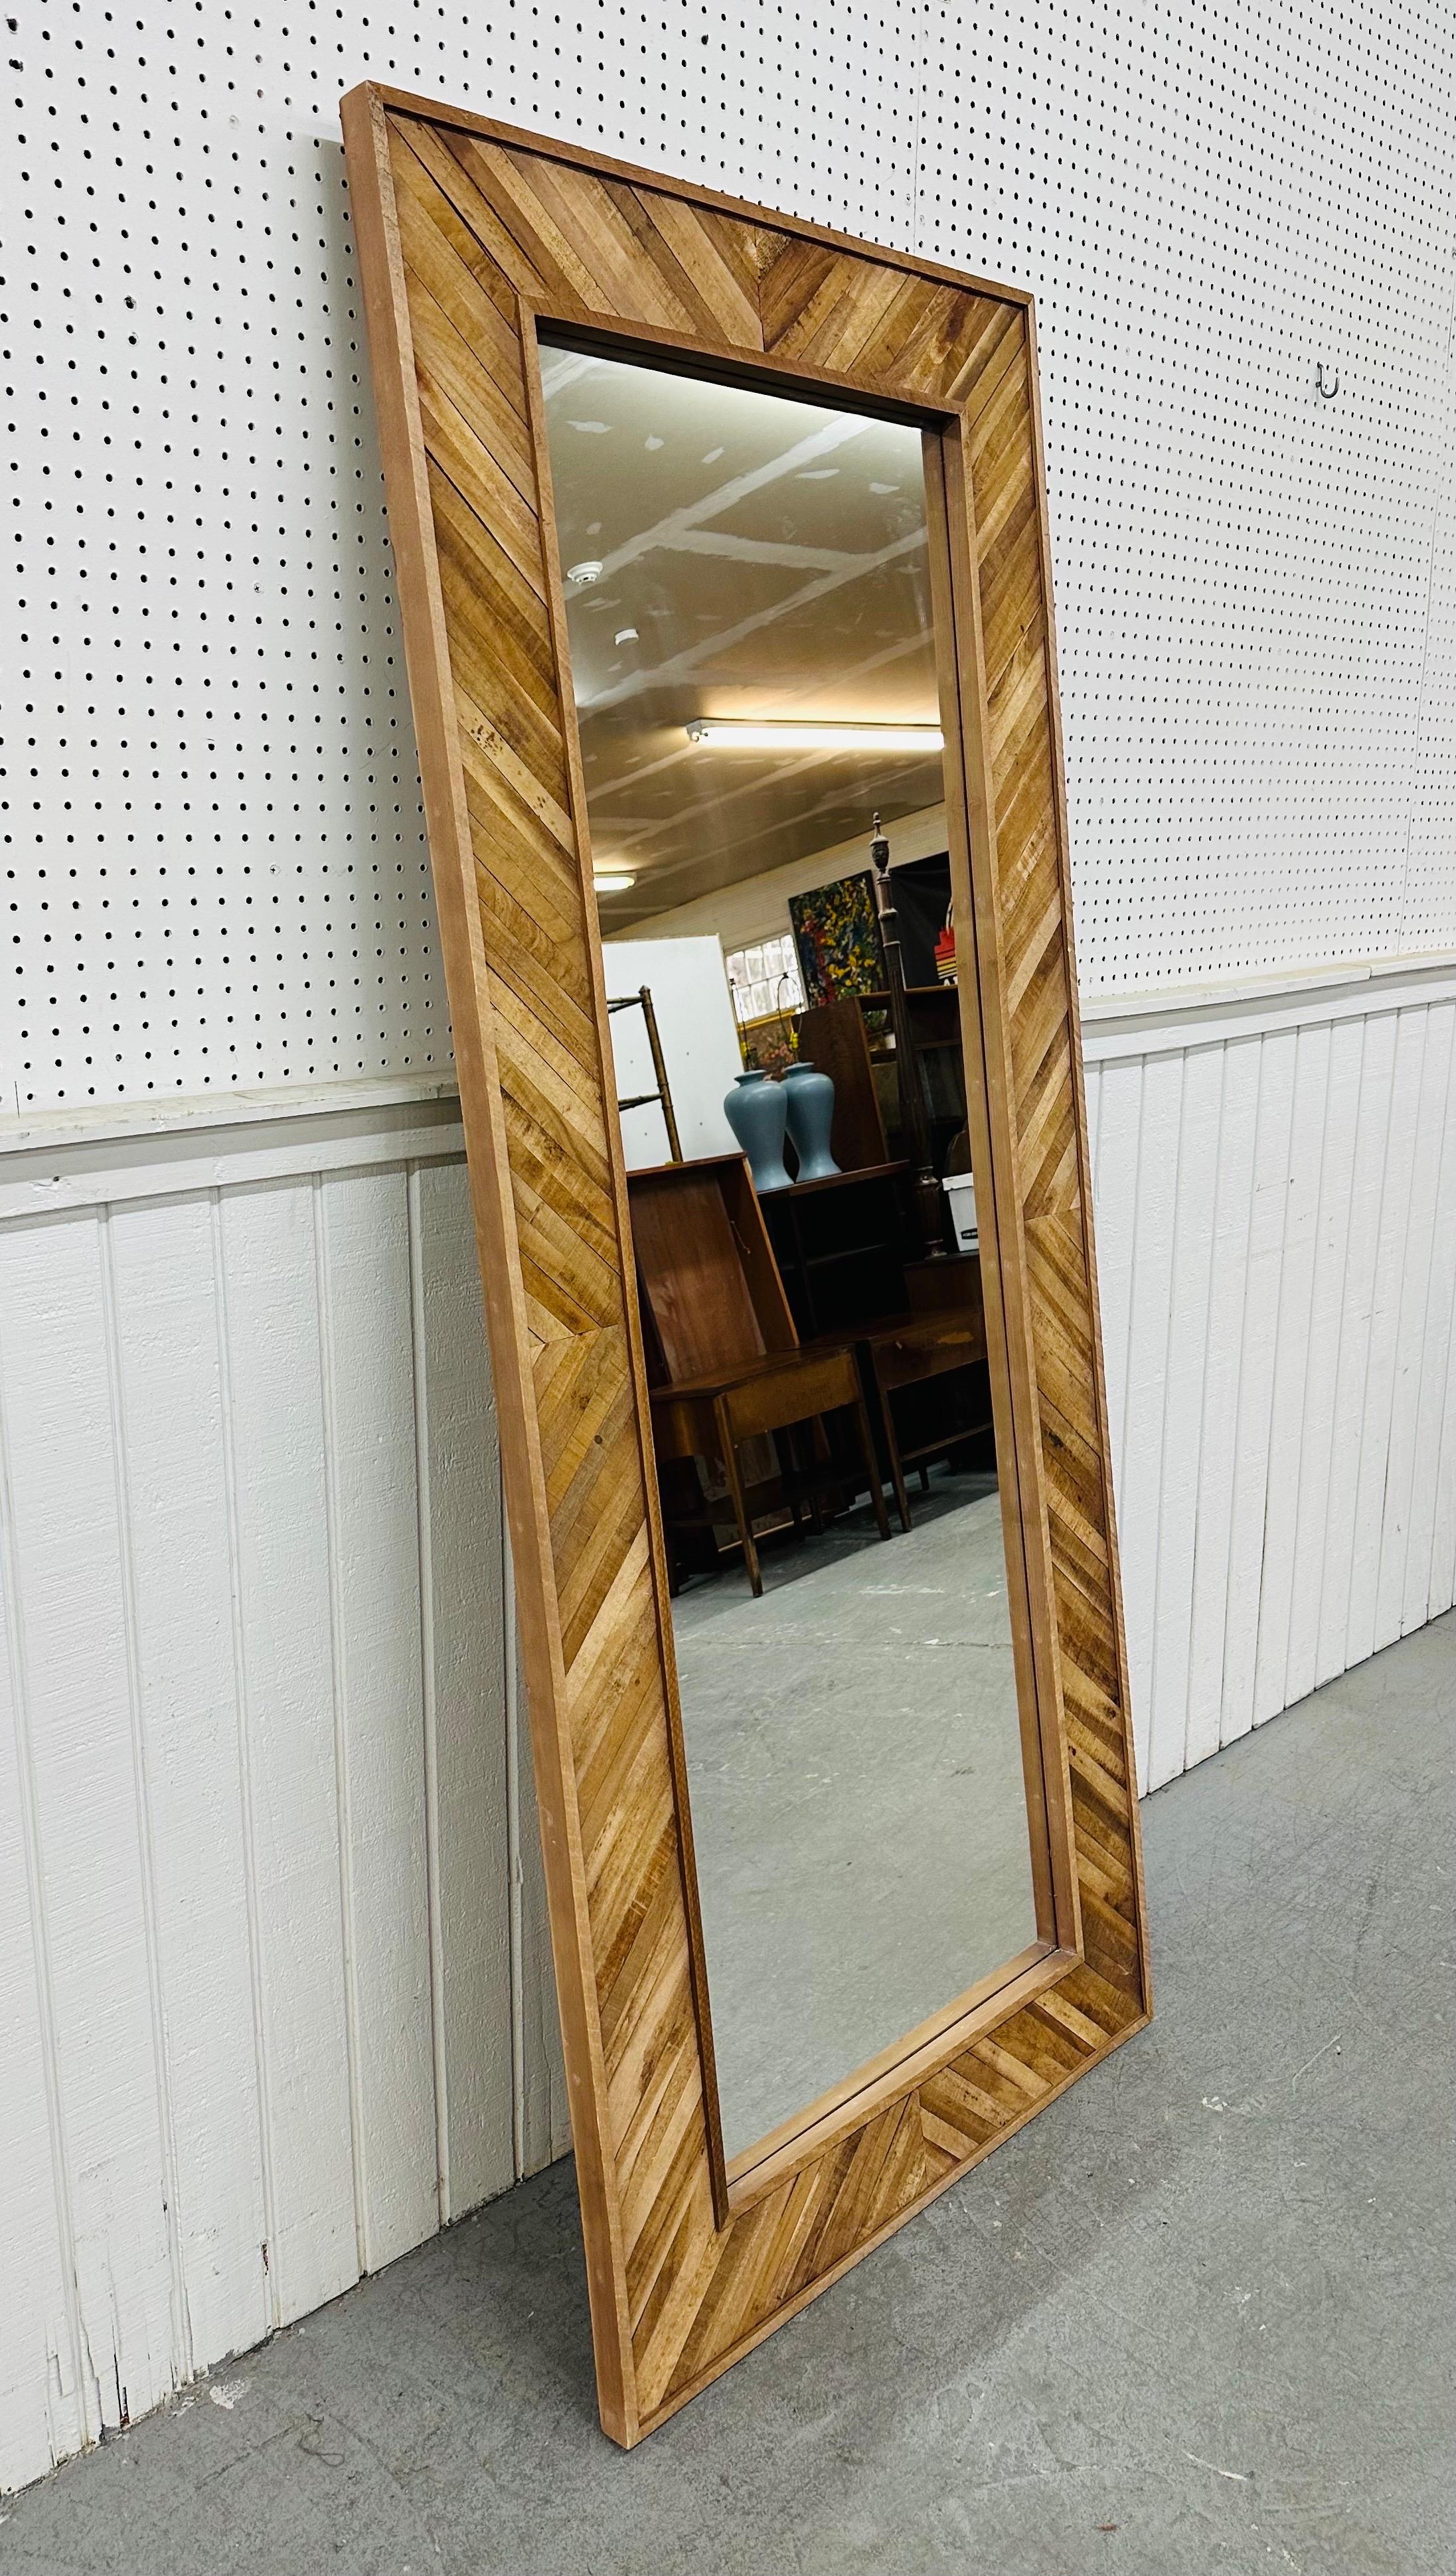 This listing is for a Modern Reclaimed Wooden Floor Mirror. Featuring a straight line design, rectangular reclaimed wood frame, centered mirror, and hooks on the back for hanging. This is an exceptional combination of quality and design!